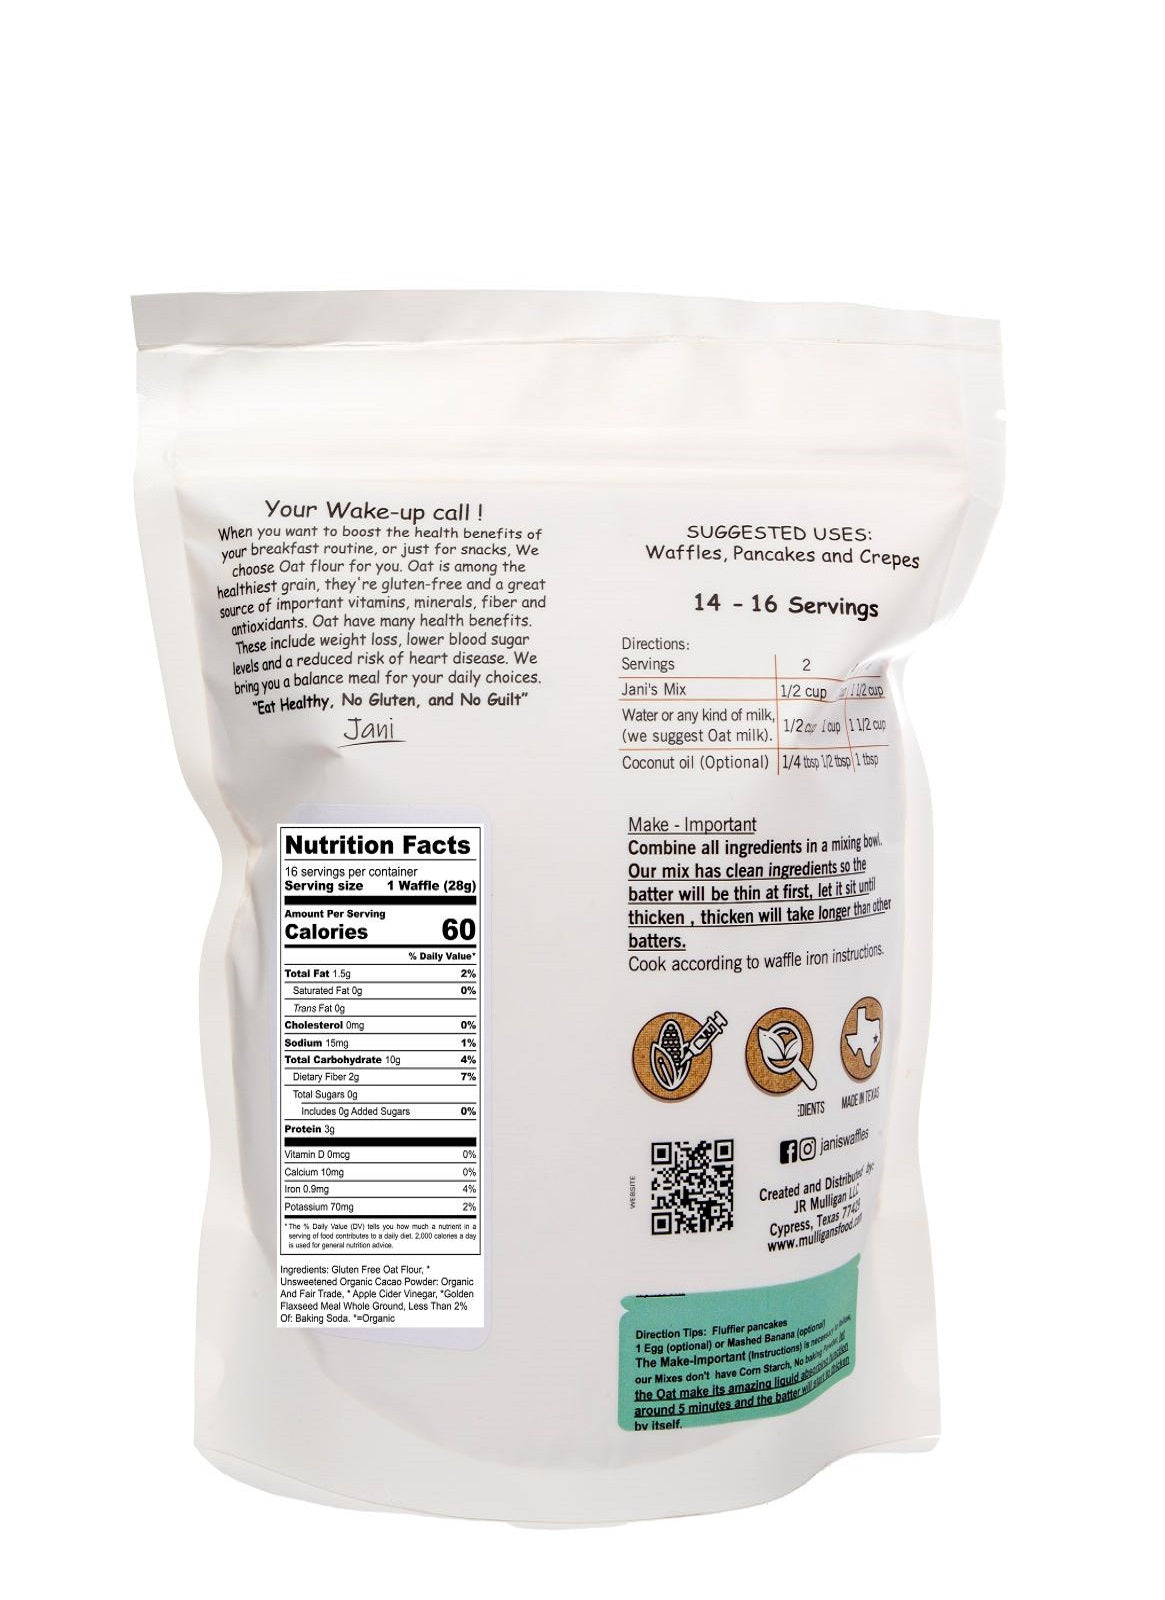 CHOCOLATE Dry Mix for Waffles & Pancakes, Pouch of 14 to16 Servings